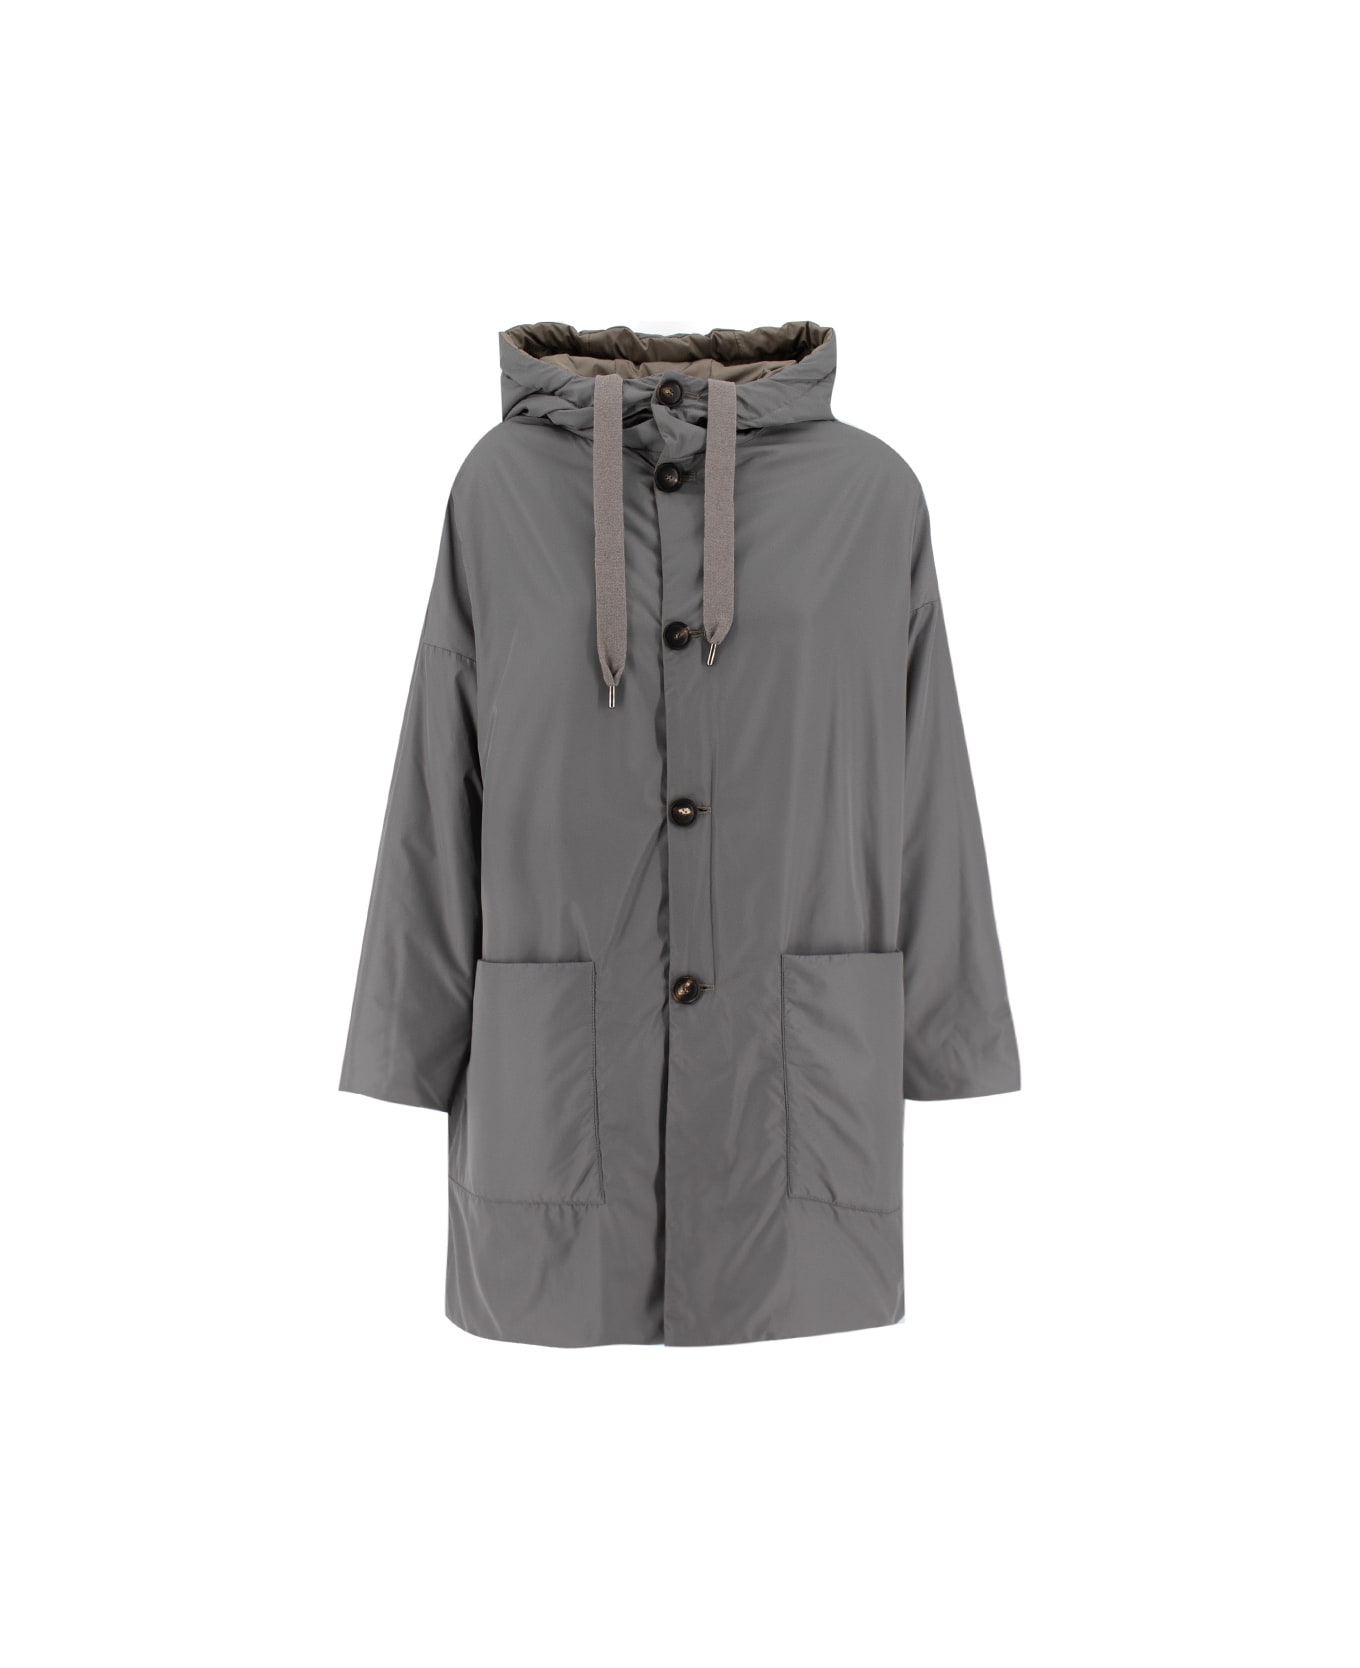 Le Tricot Perugia Parka - TAUPE/D.GREY/TAUPE  